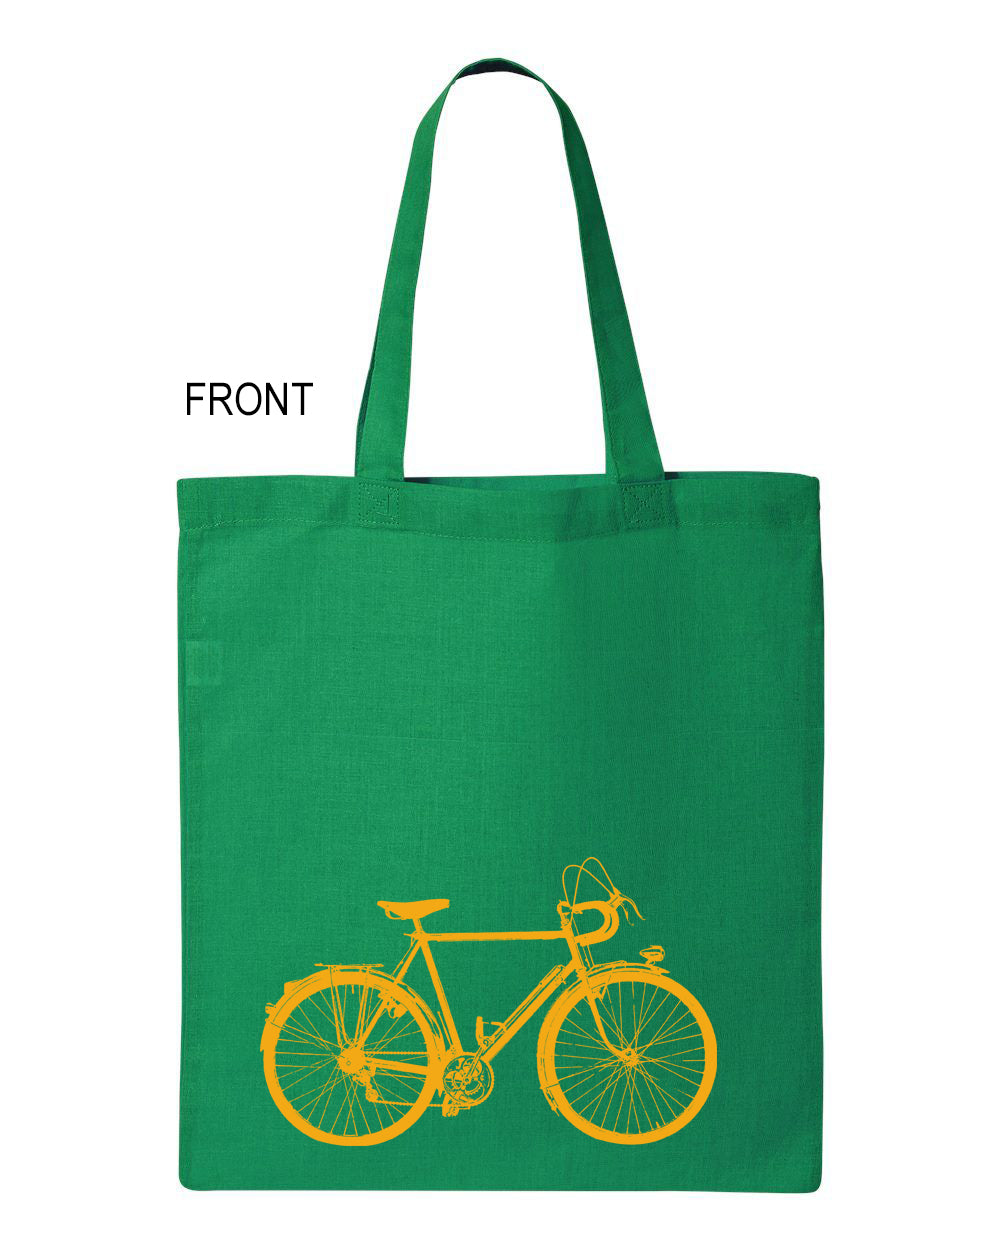 "Bicycle" Tote canvas bag